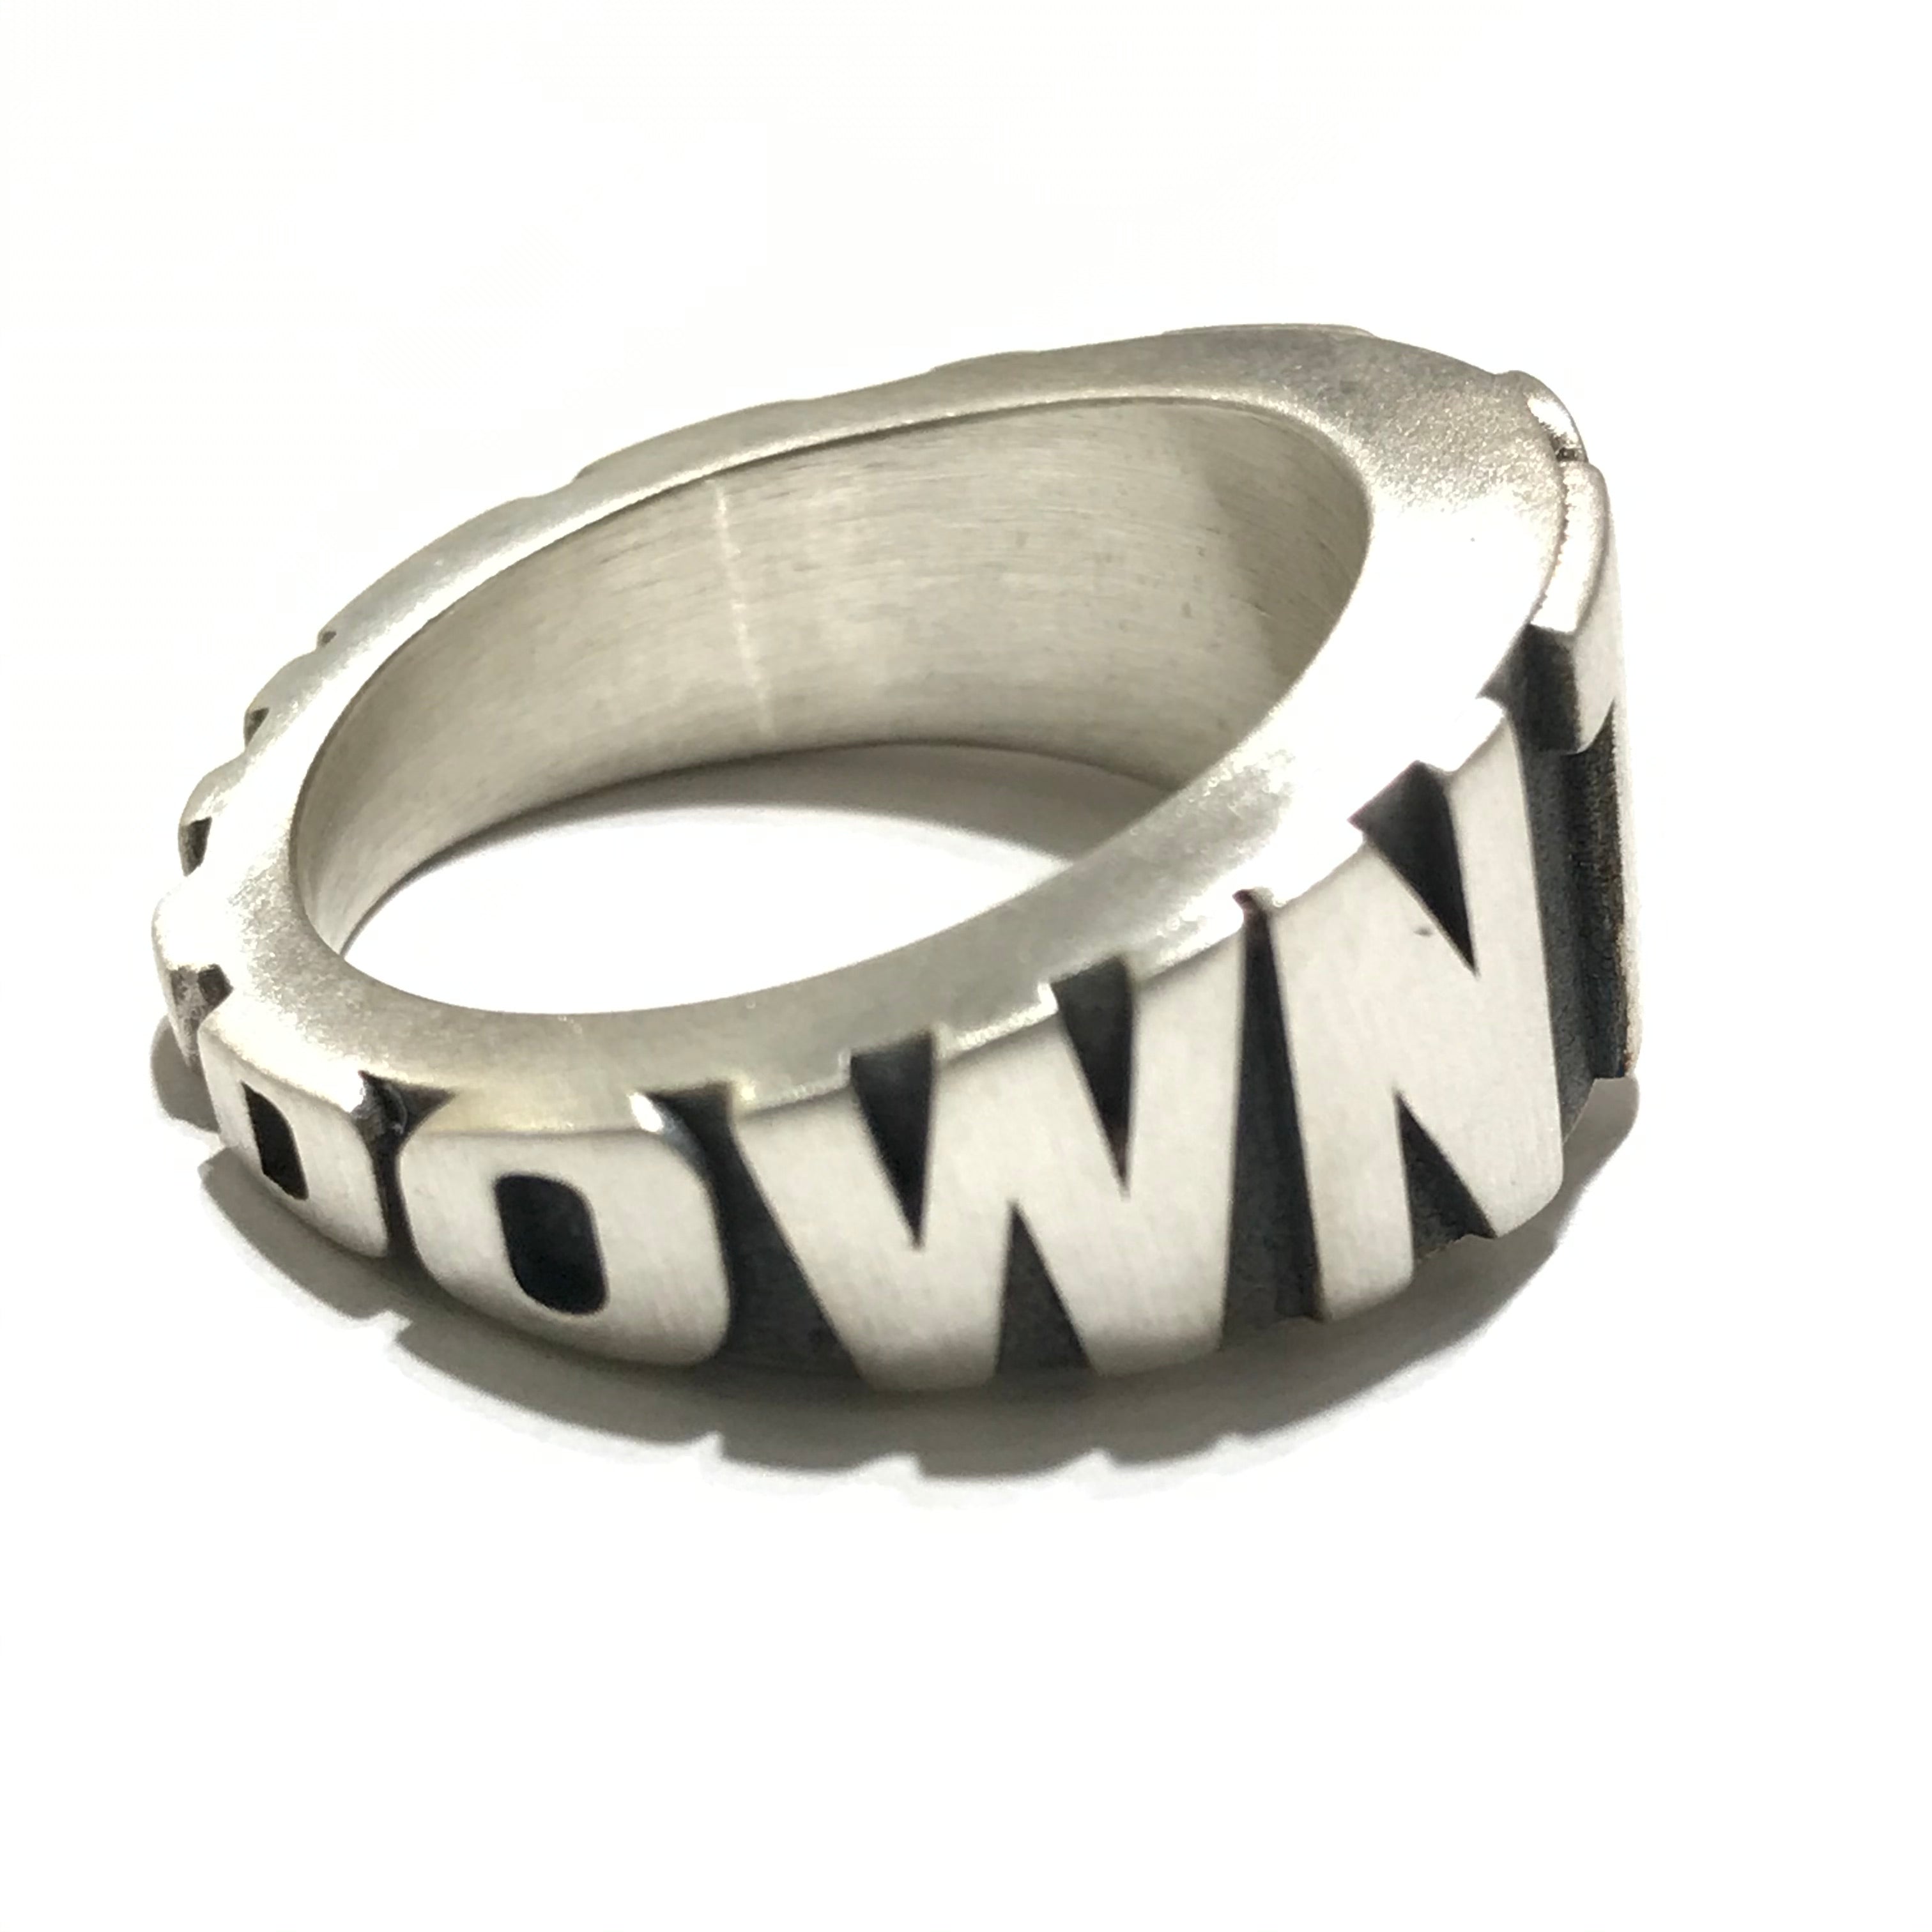 FOUND AT GALLERI PLATINA STOCKHOLM For HIM Signet ring DOWN TO EARTH